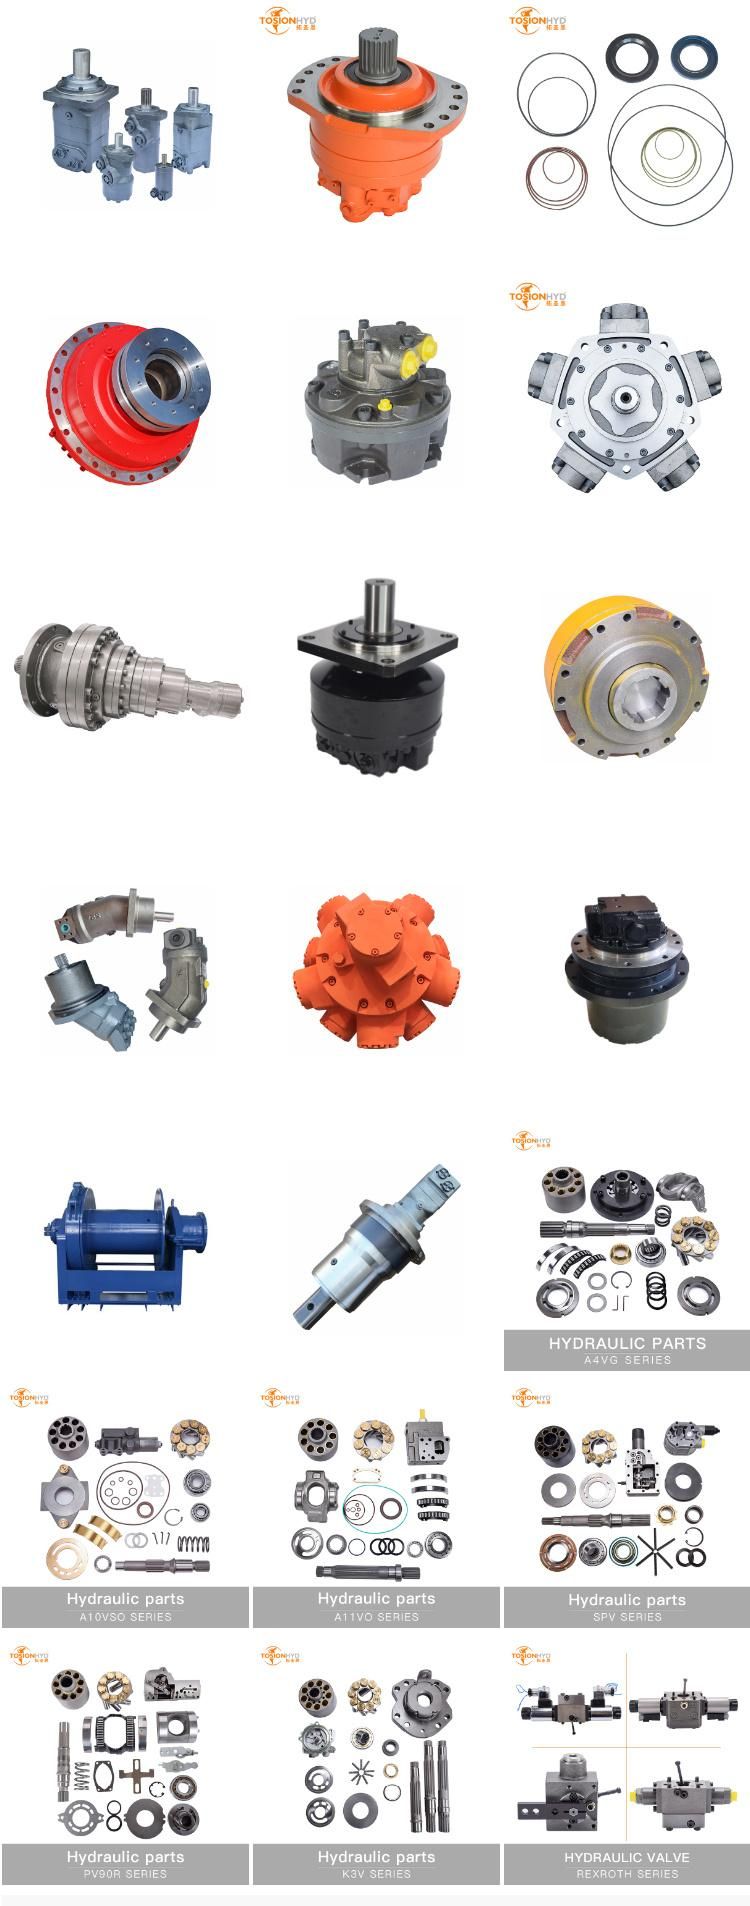 A2FM80 A2FM107 Hydraulic Motor Parts with Rexroth Spare Repair Kits